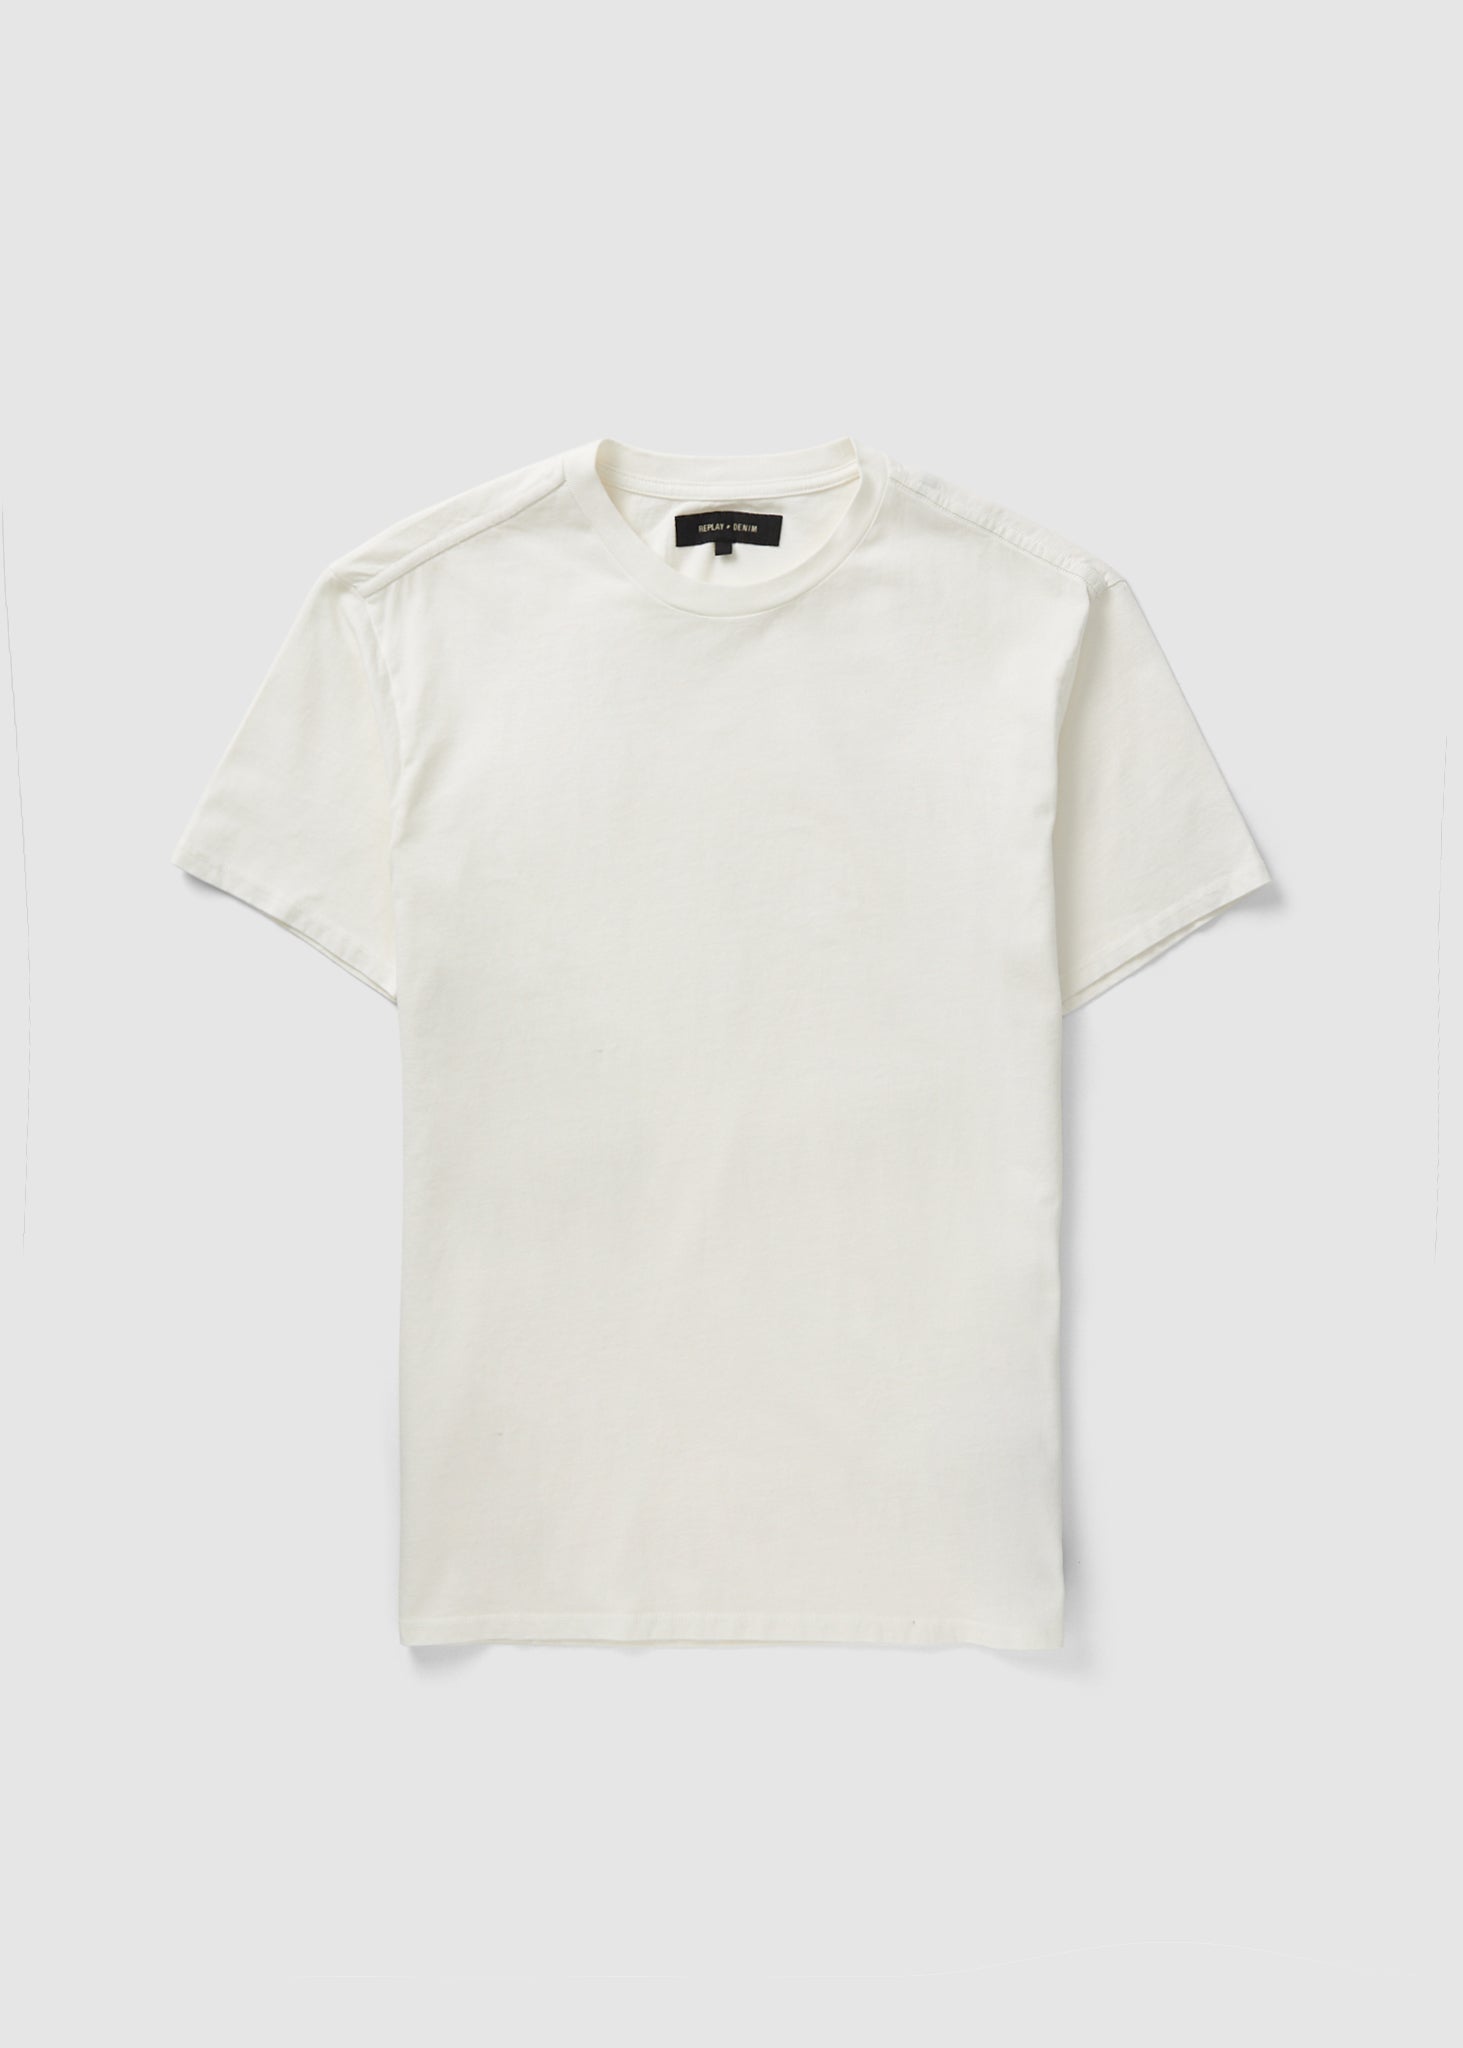 Image of Replay Mens Sartoriale Plain Crew Neck T-Shirt In Chalk